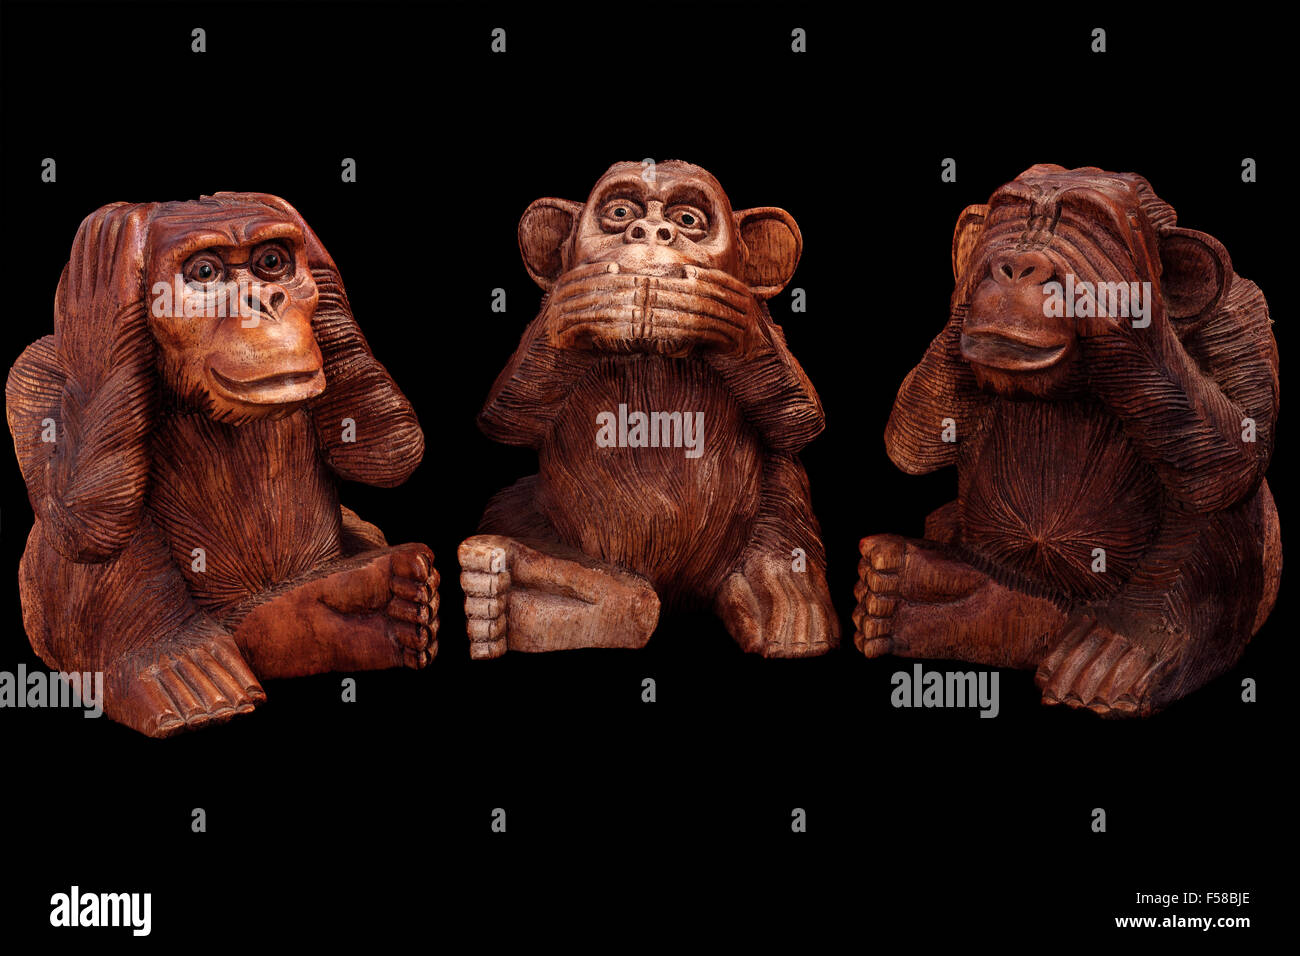 Three wise monkeys. Figurines of wood on a black background. Stock Photo